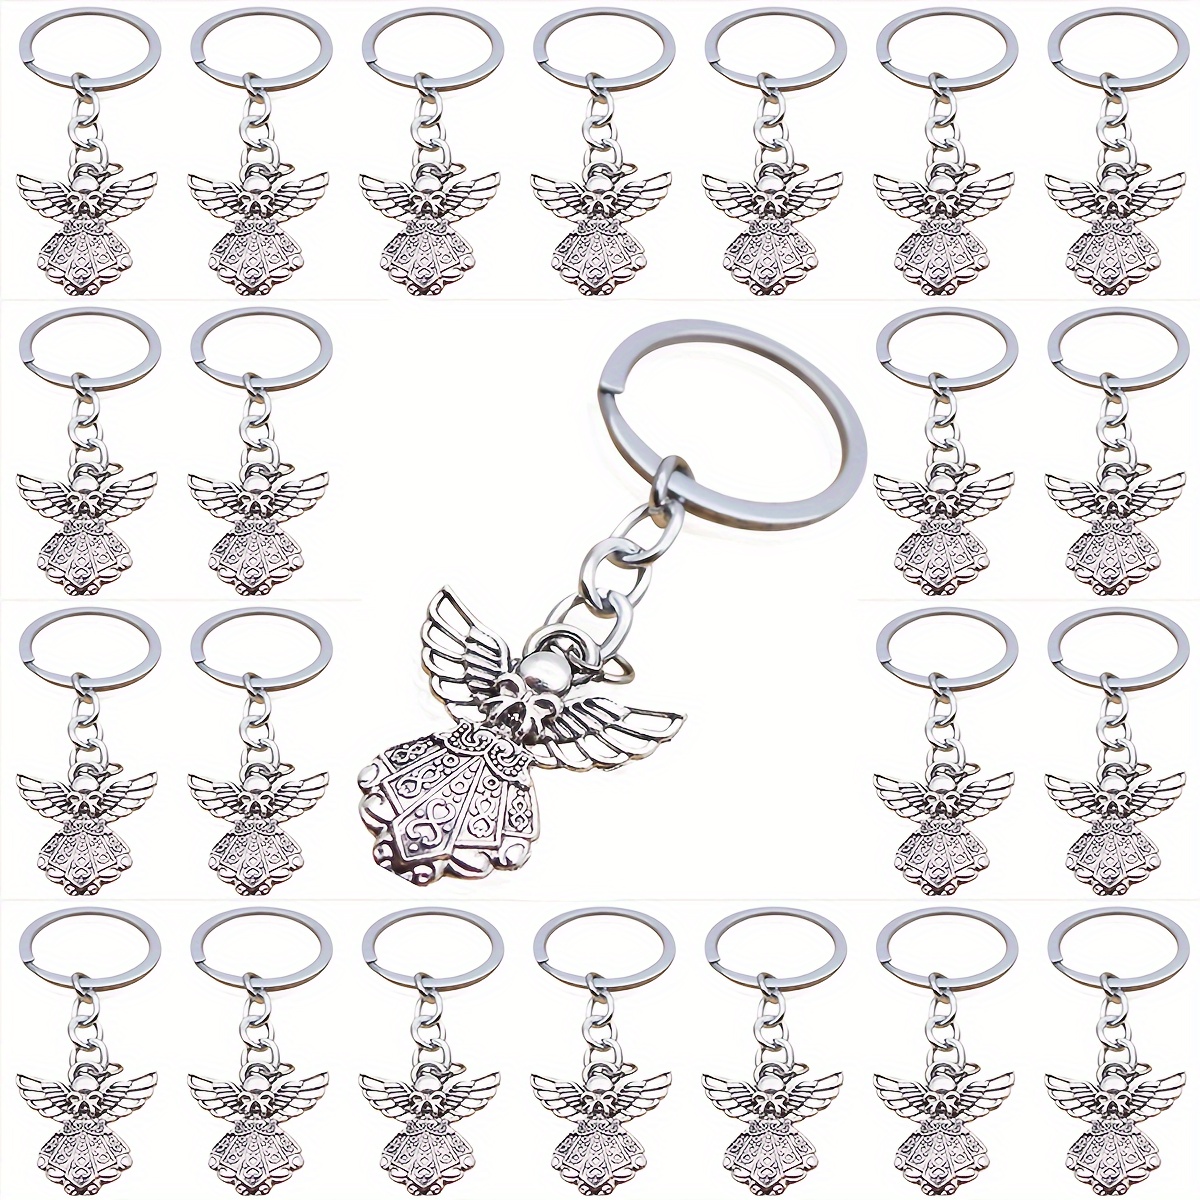 

50pcs Guardian Keychain Silvery Charm Keychain Pendant Baptism Favors Key Ring For Women Funeral Party Gifts Arts And Crafts